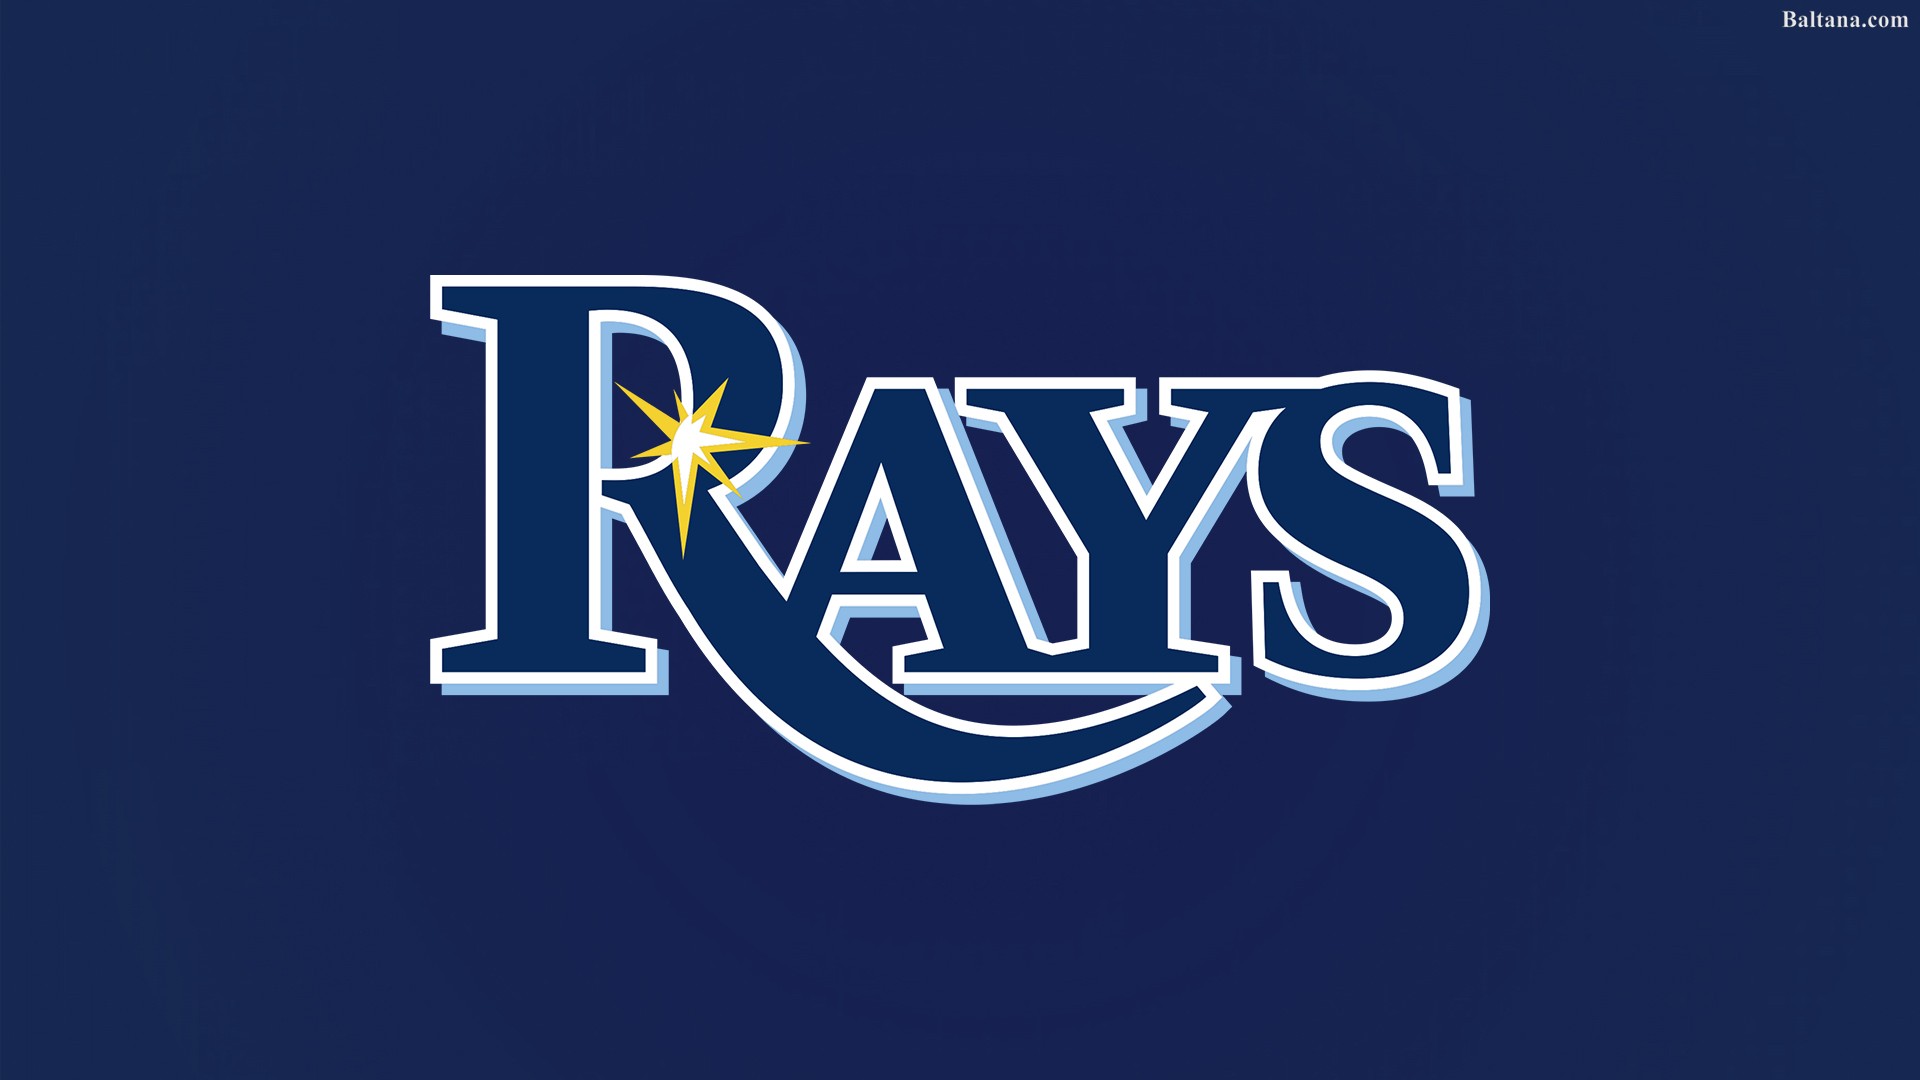 Tampa Bay Rays Wallpaper - Tampa Bay Rays , HD Wallpaper & Backgrounds